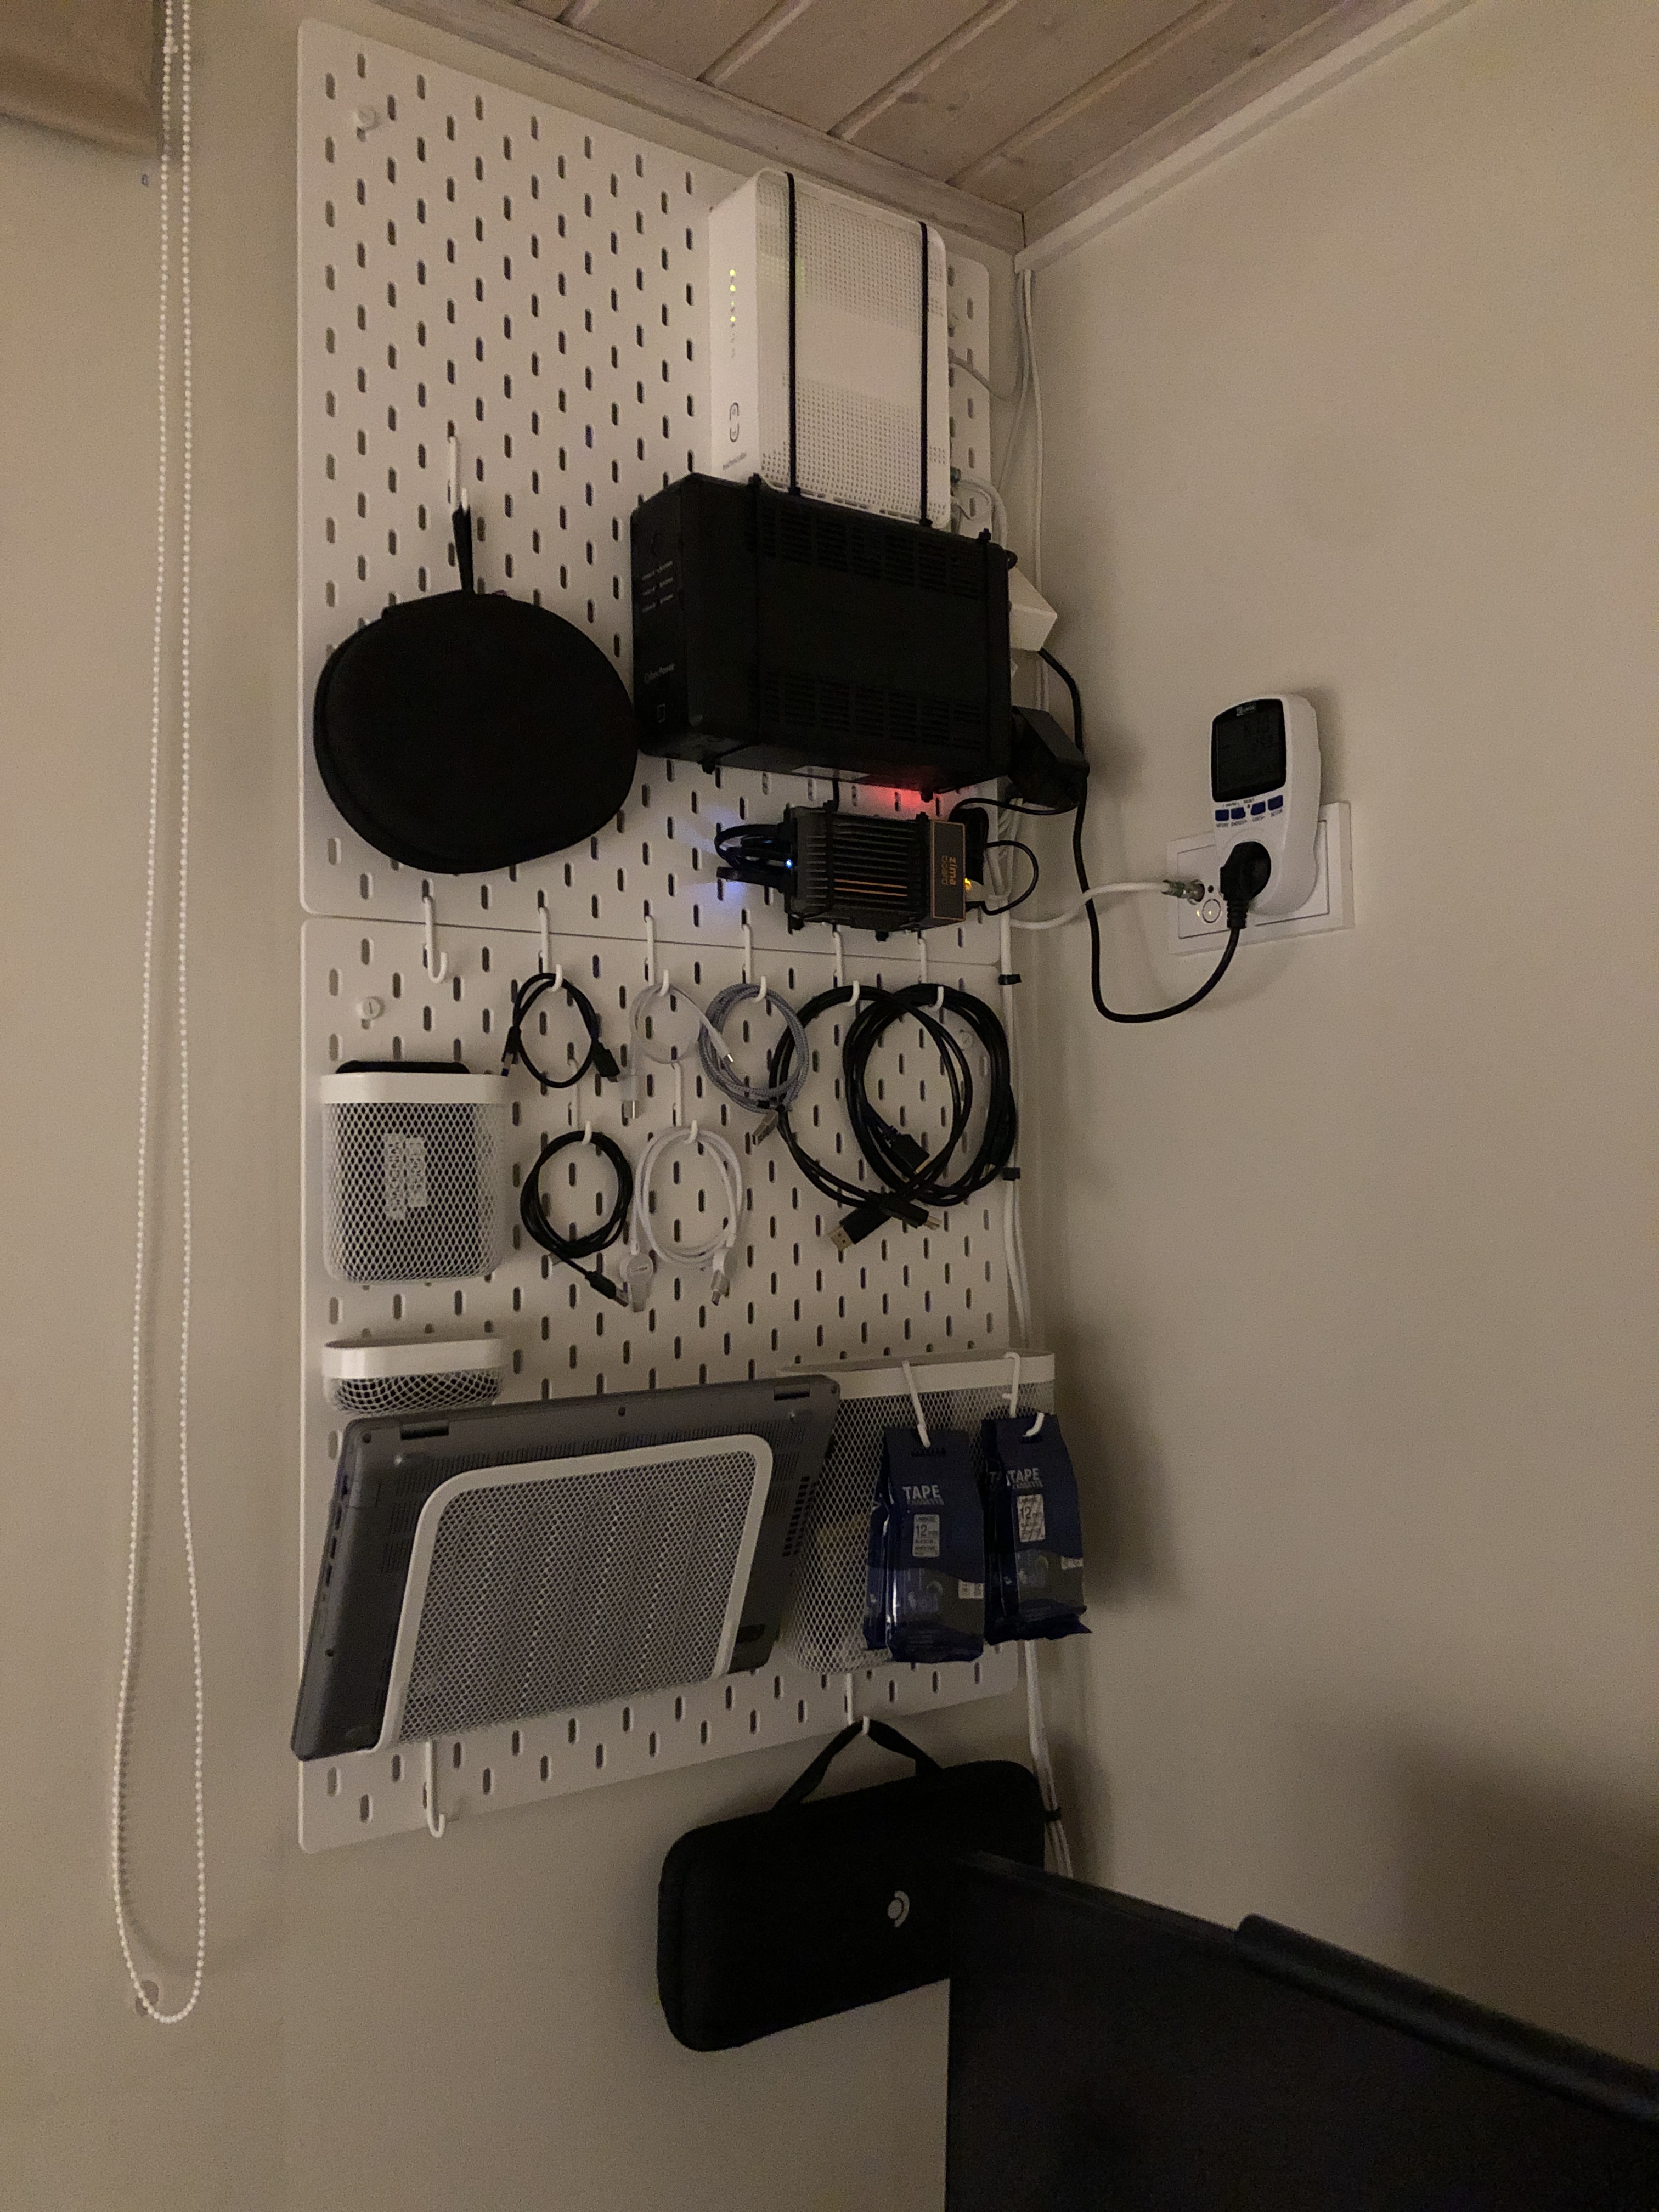 Zimaboard: the closest thing to my dream home server setup :: ./techtipsy —  Ramblings of a tech enthusiast.